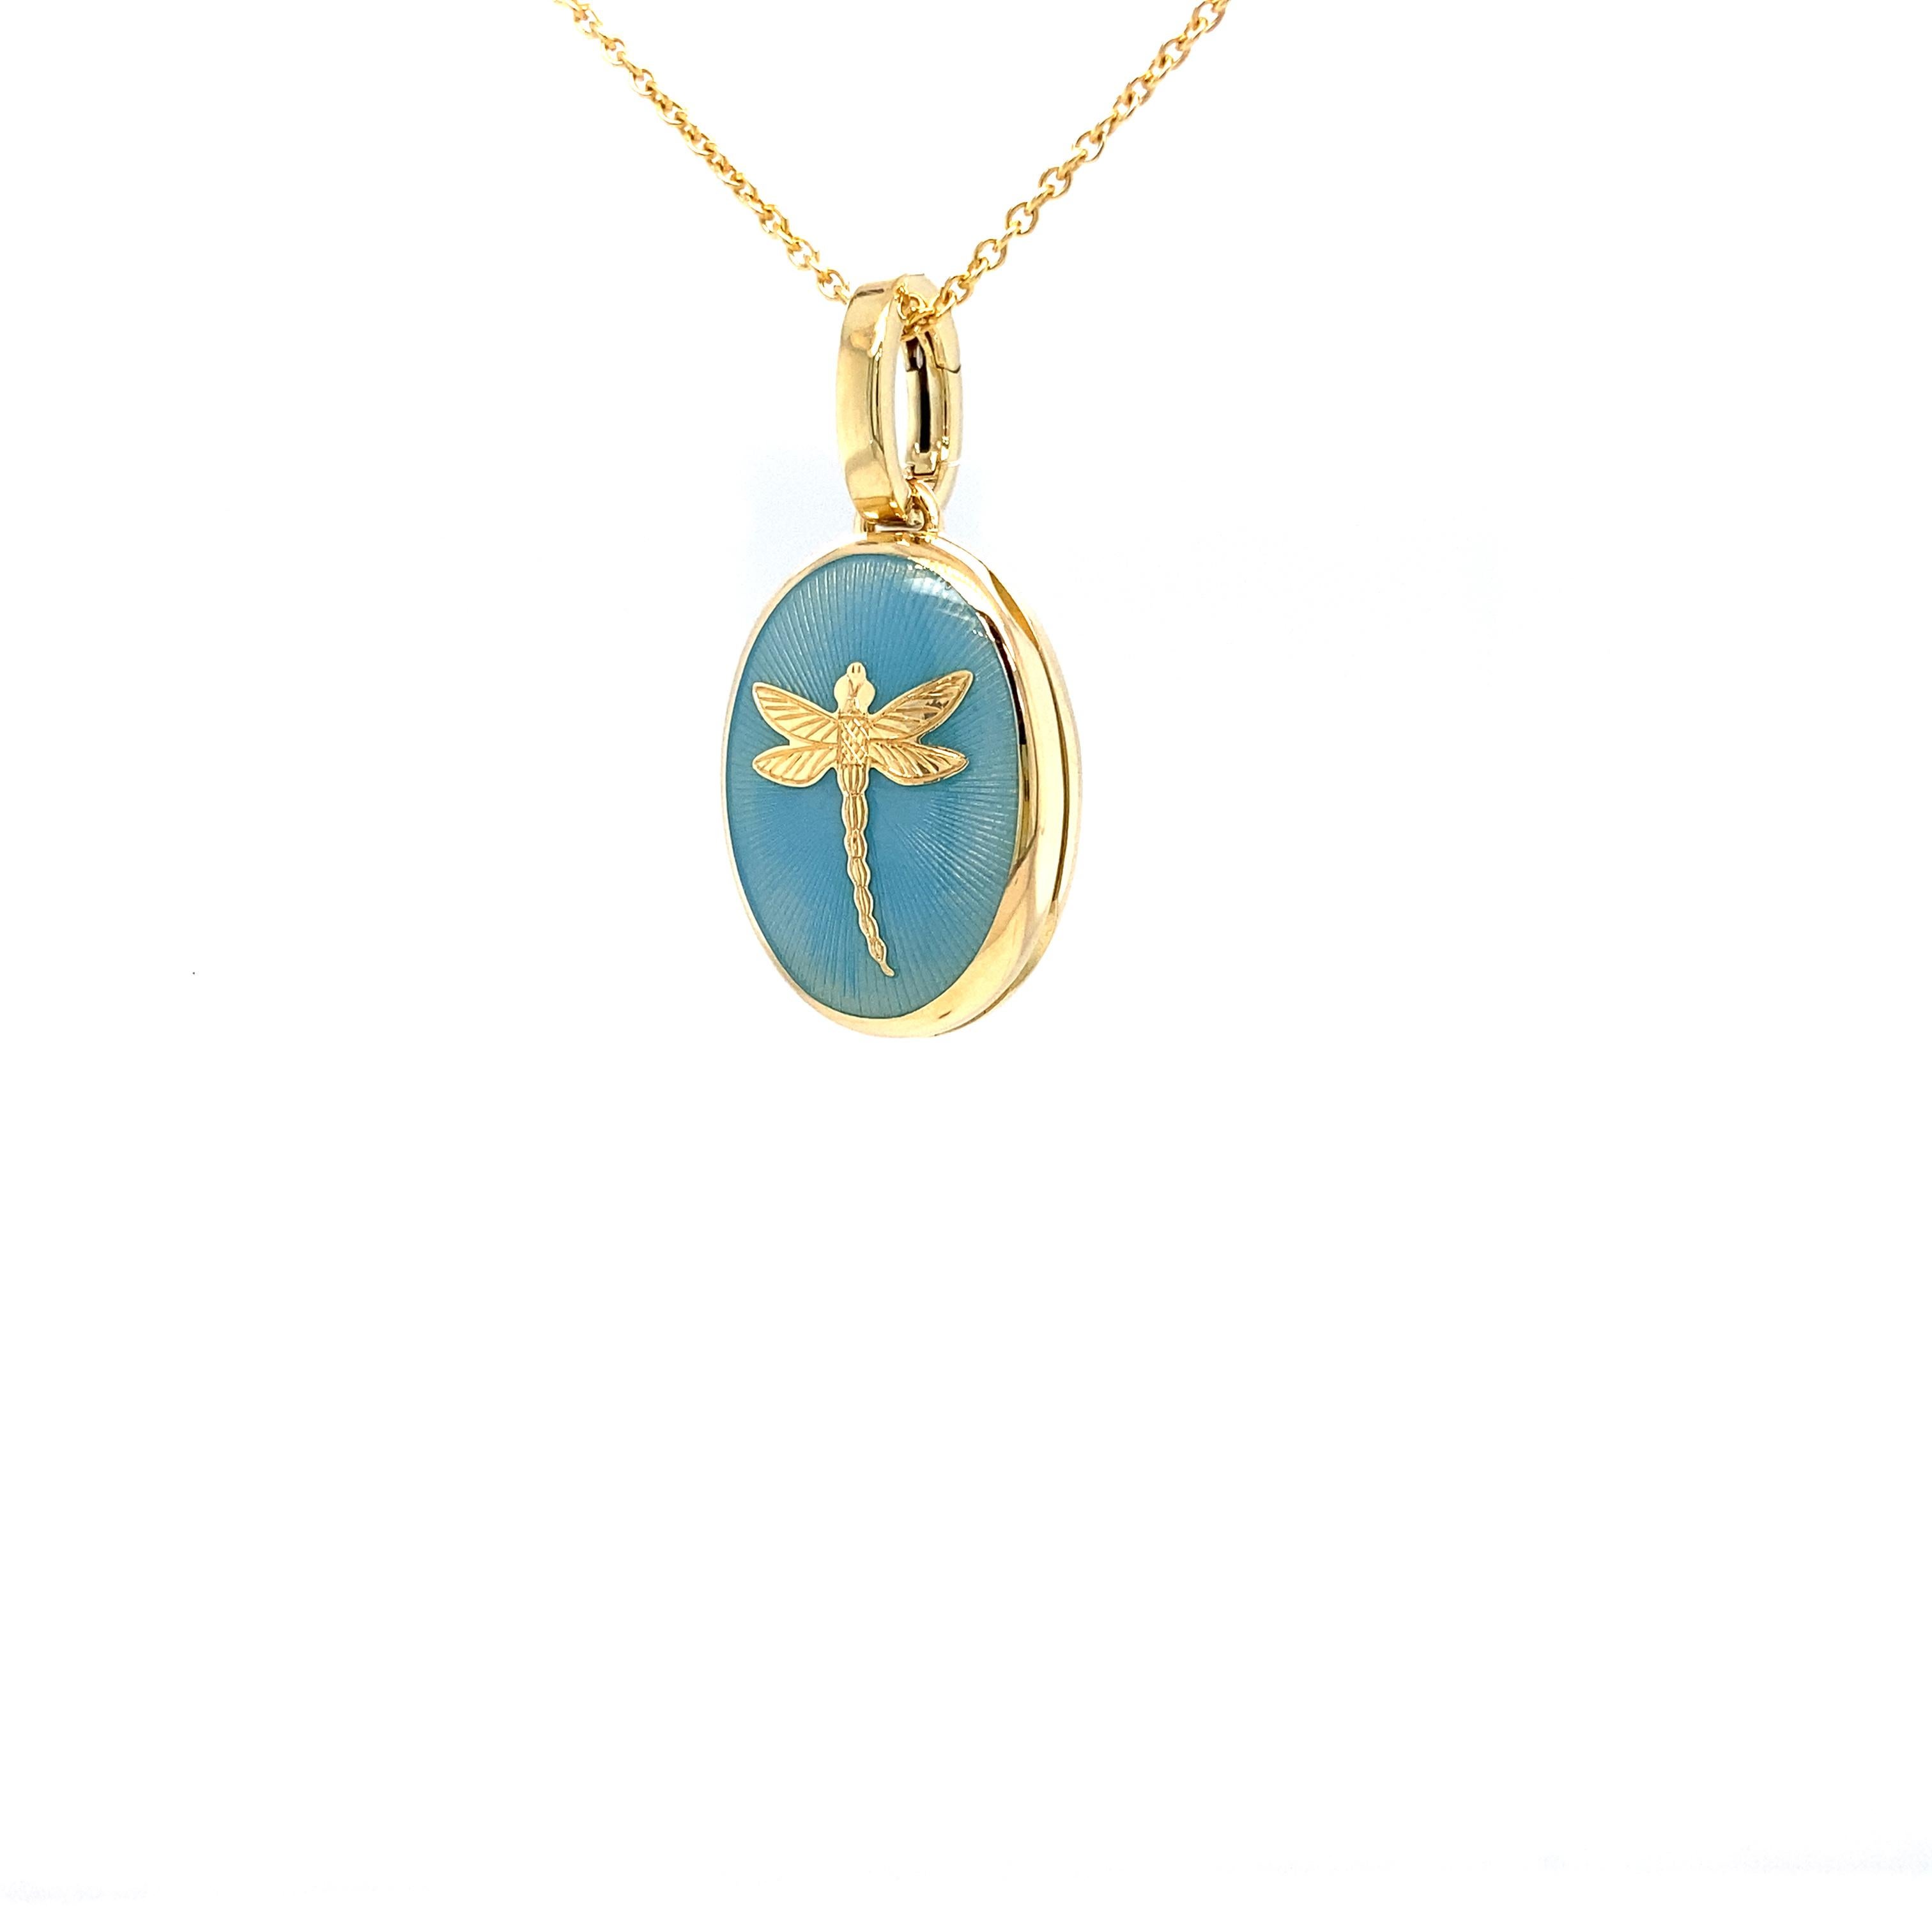 Oval Locket Pendant Necklace Dragonfly 18k Yellow Gold Turquoise Enamel For Sale 1